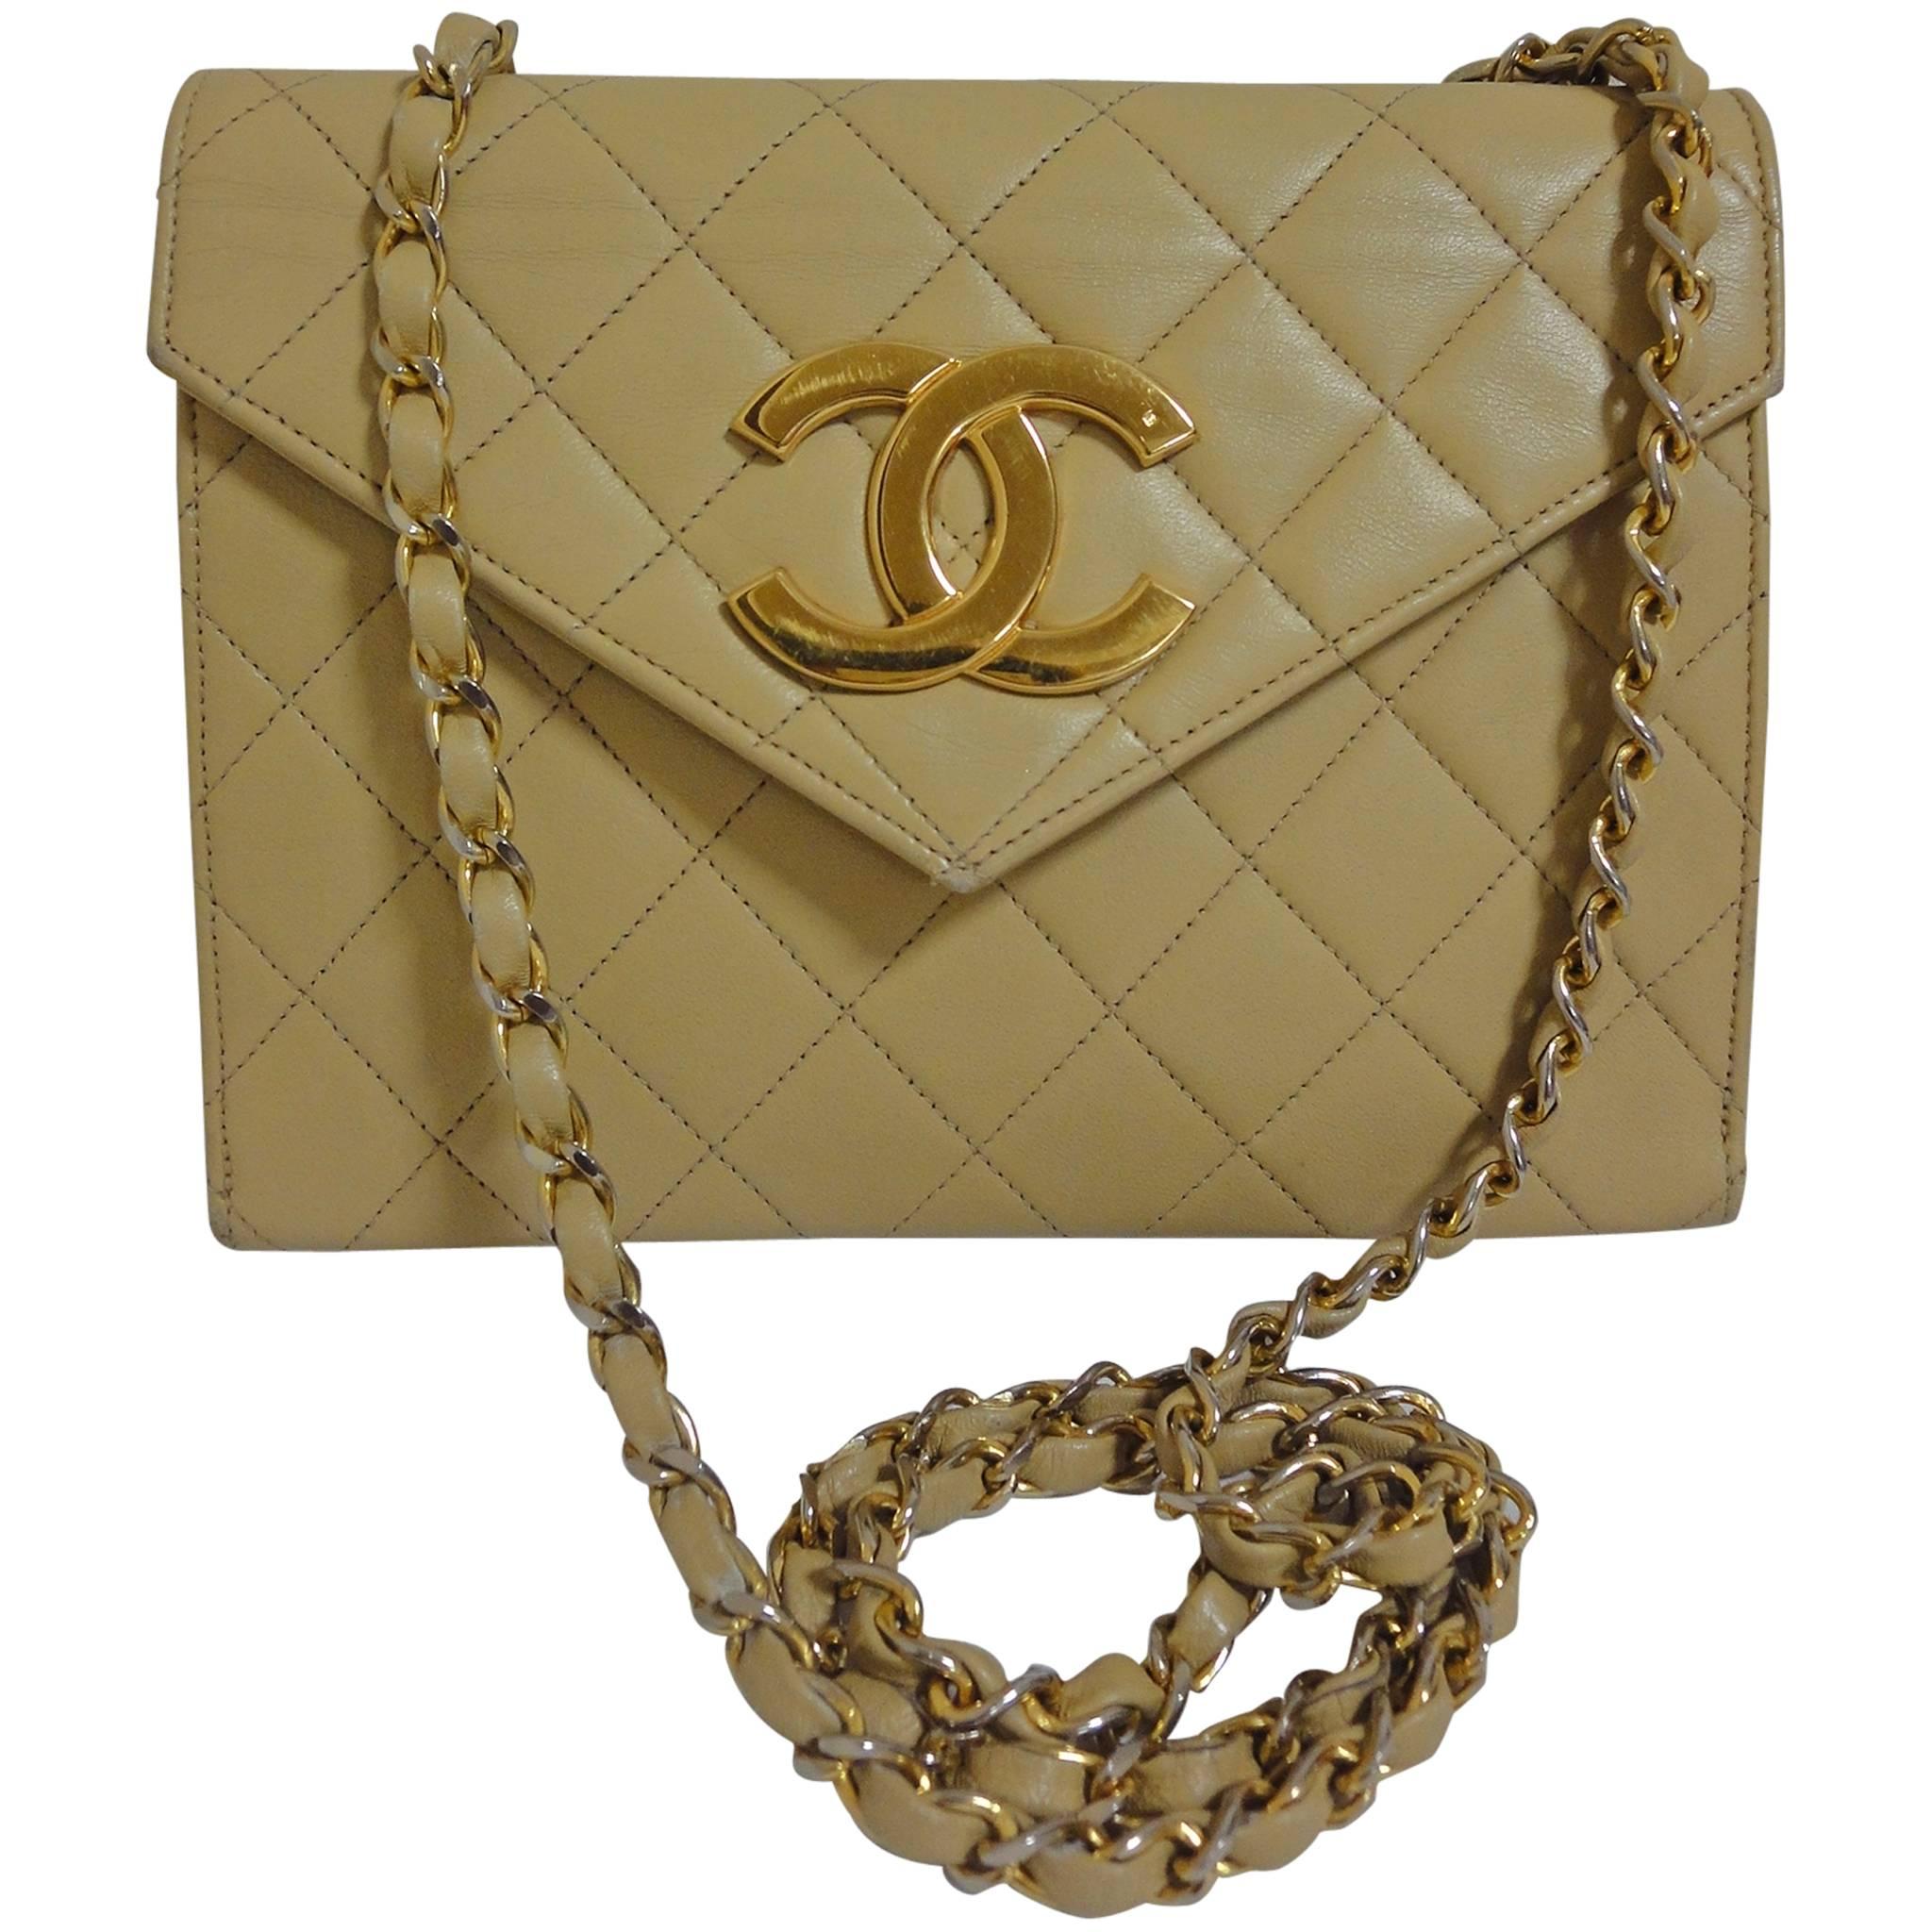 1980s Vintage CHANEL beige quilted lambskin chain shoulder purse with large CC